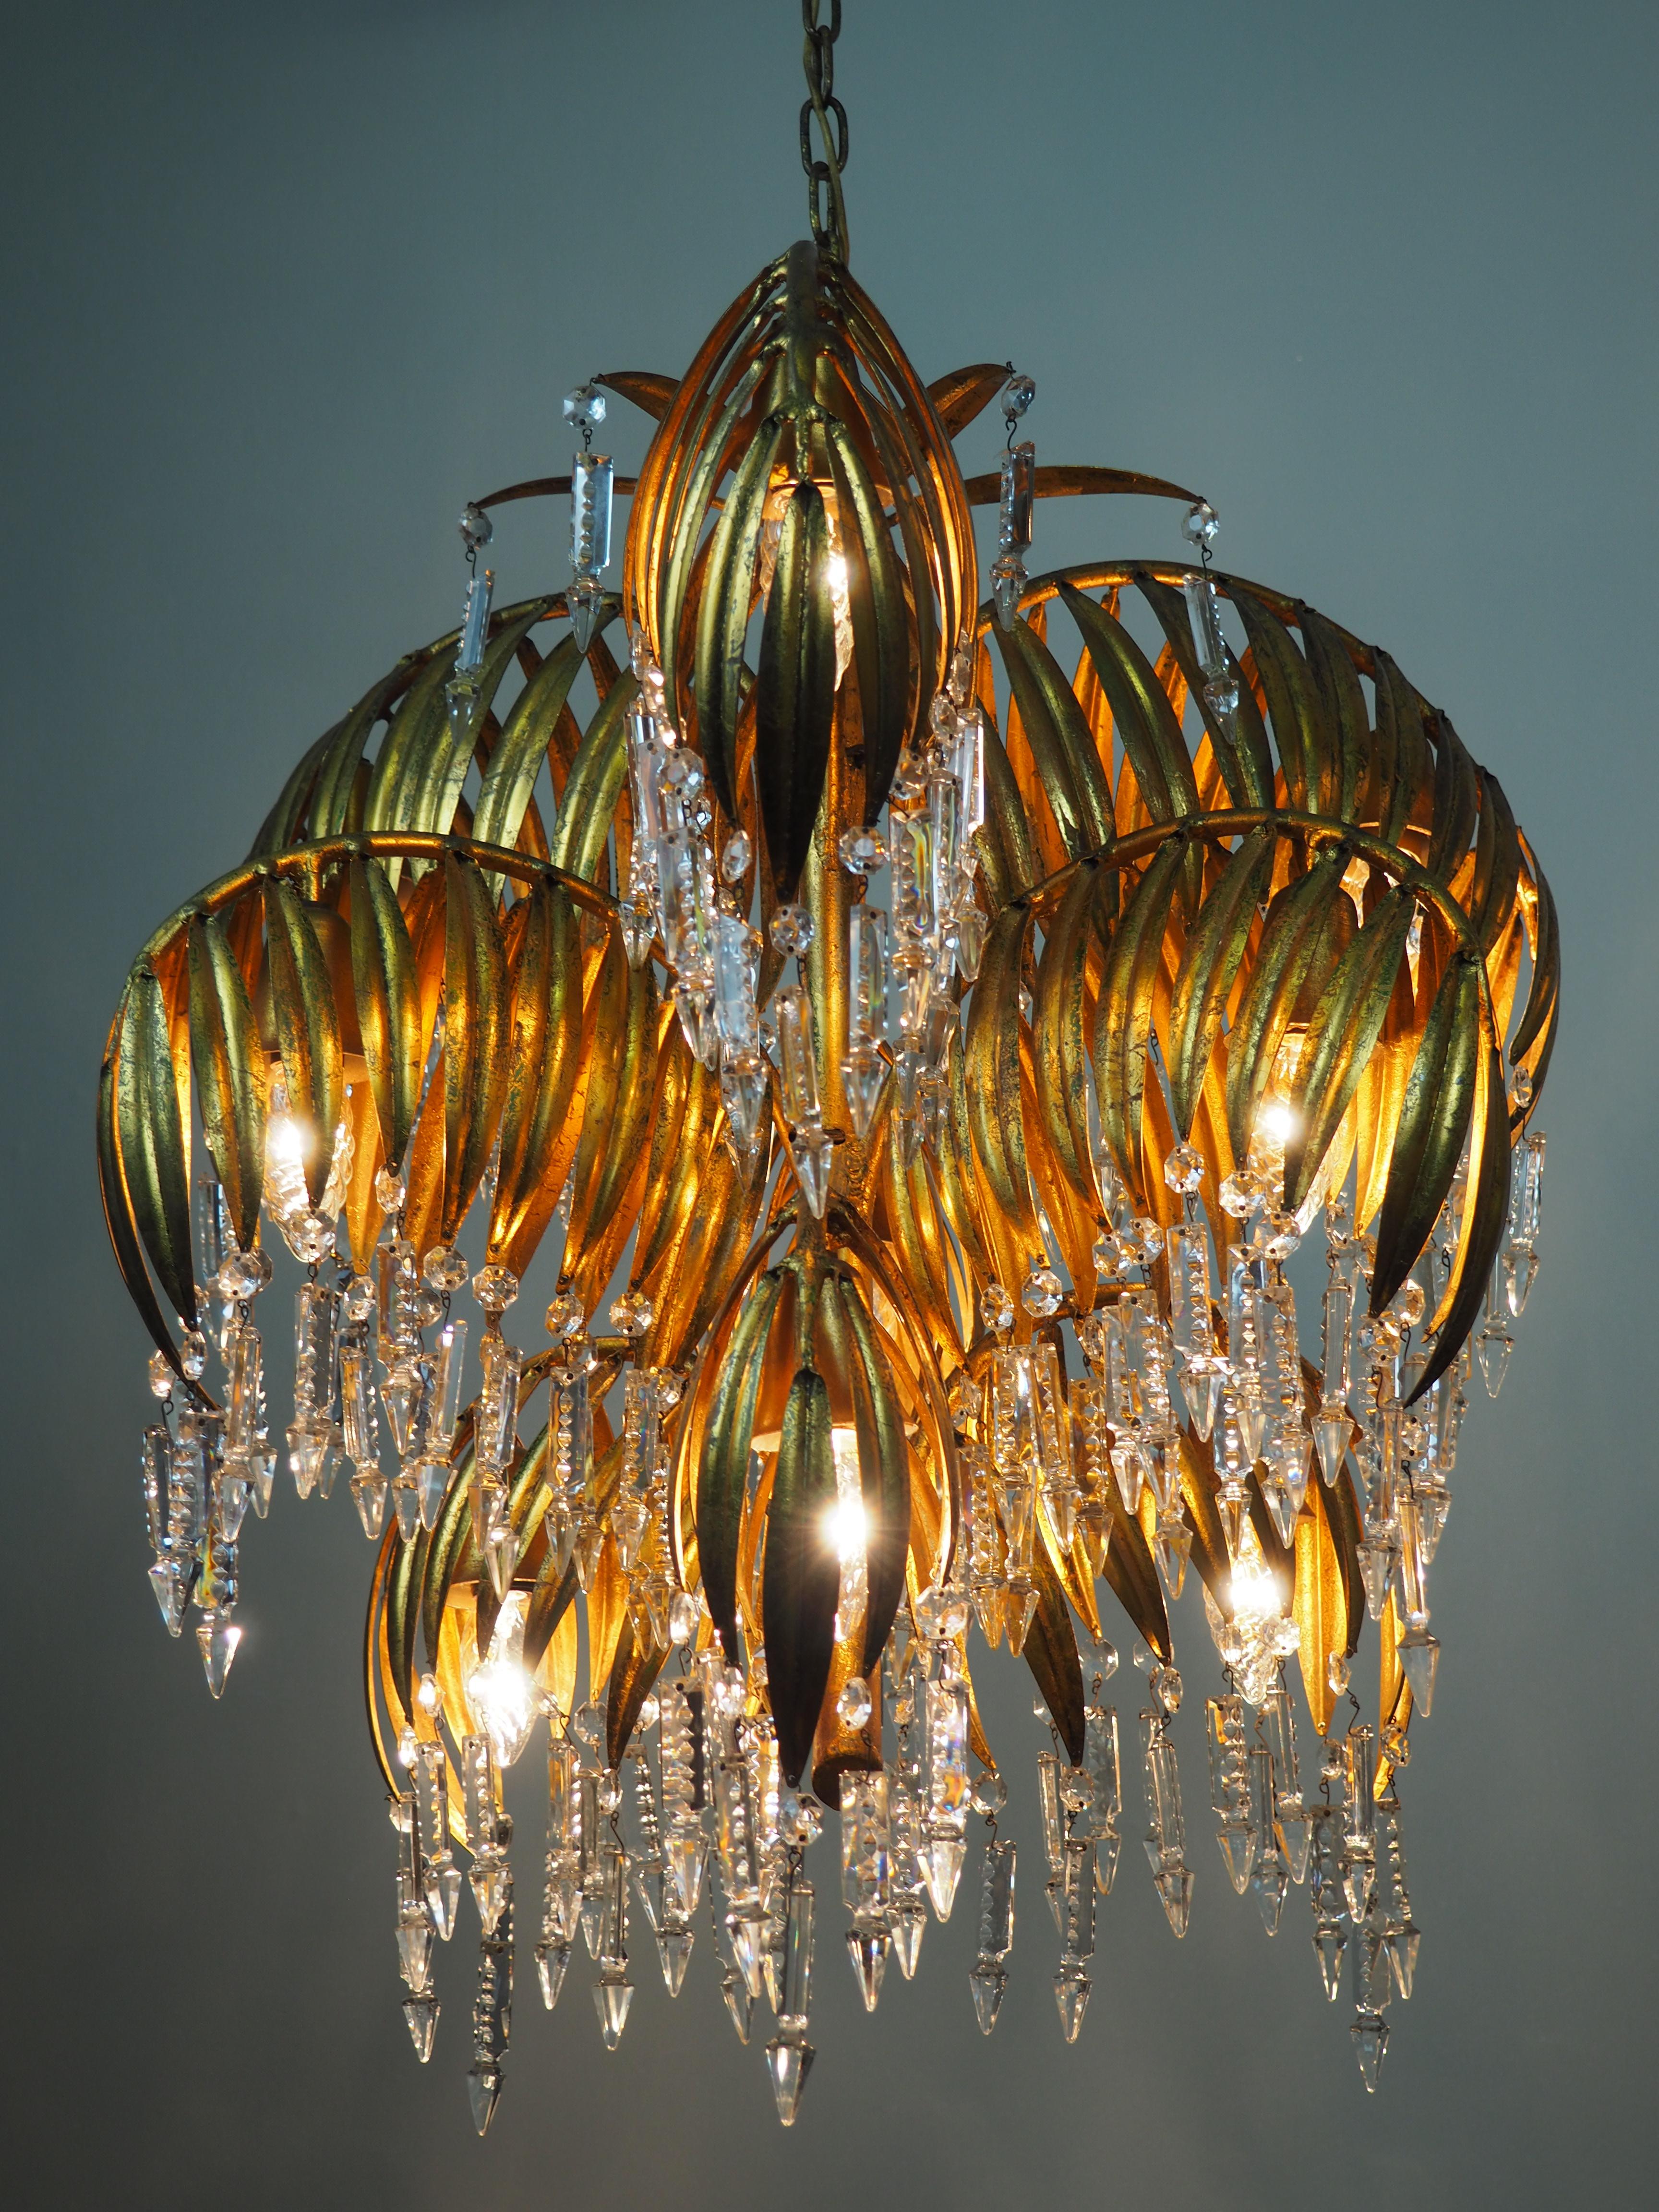 A beautiful and rare palm tree chandelier attributed to Hans Kögl, Germany, circa 1970s.
This wonderful nine-light chandelier is made of gilt metal and decorated with crystals.
Dimensions: W 25.59 x H 25.59 (51.18 inkl. chain and canopy)
Socket: